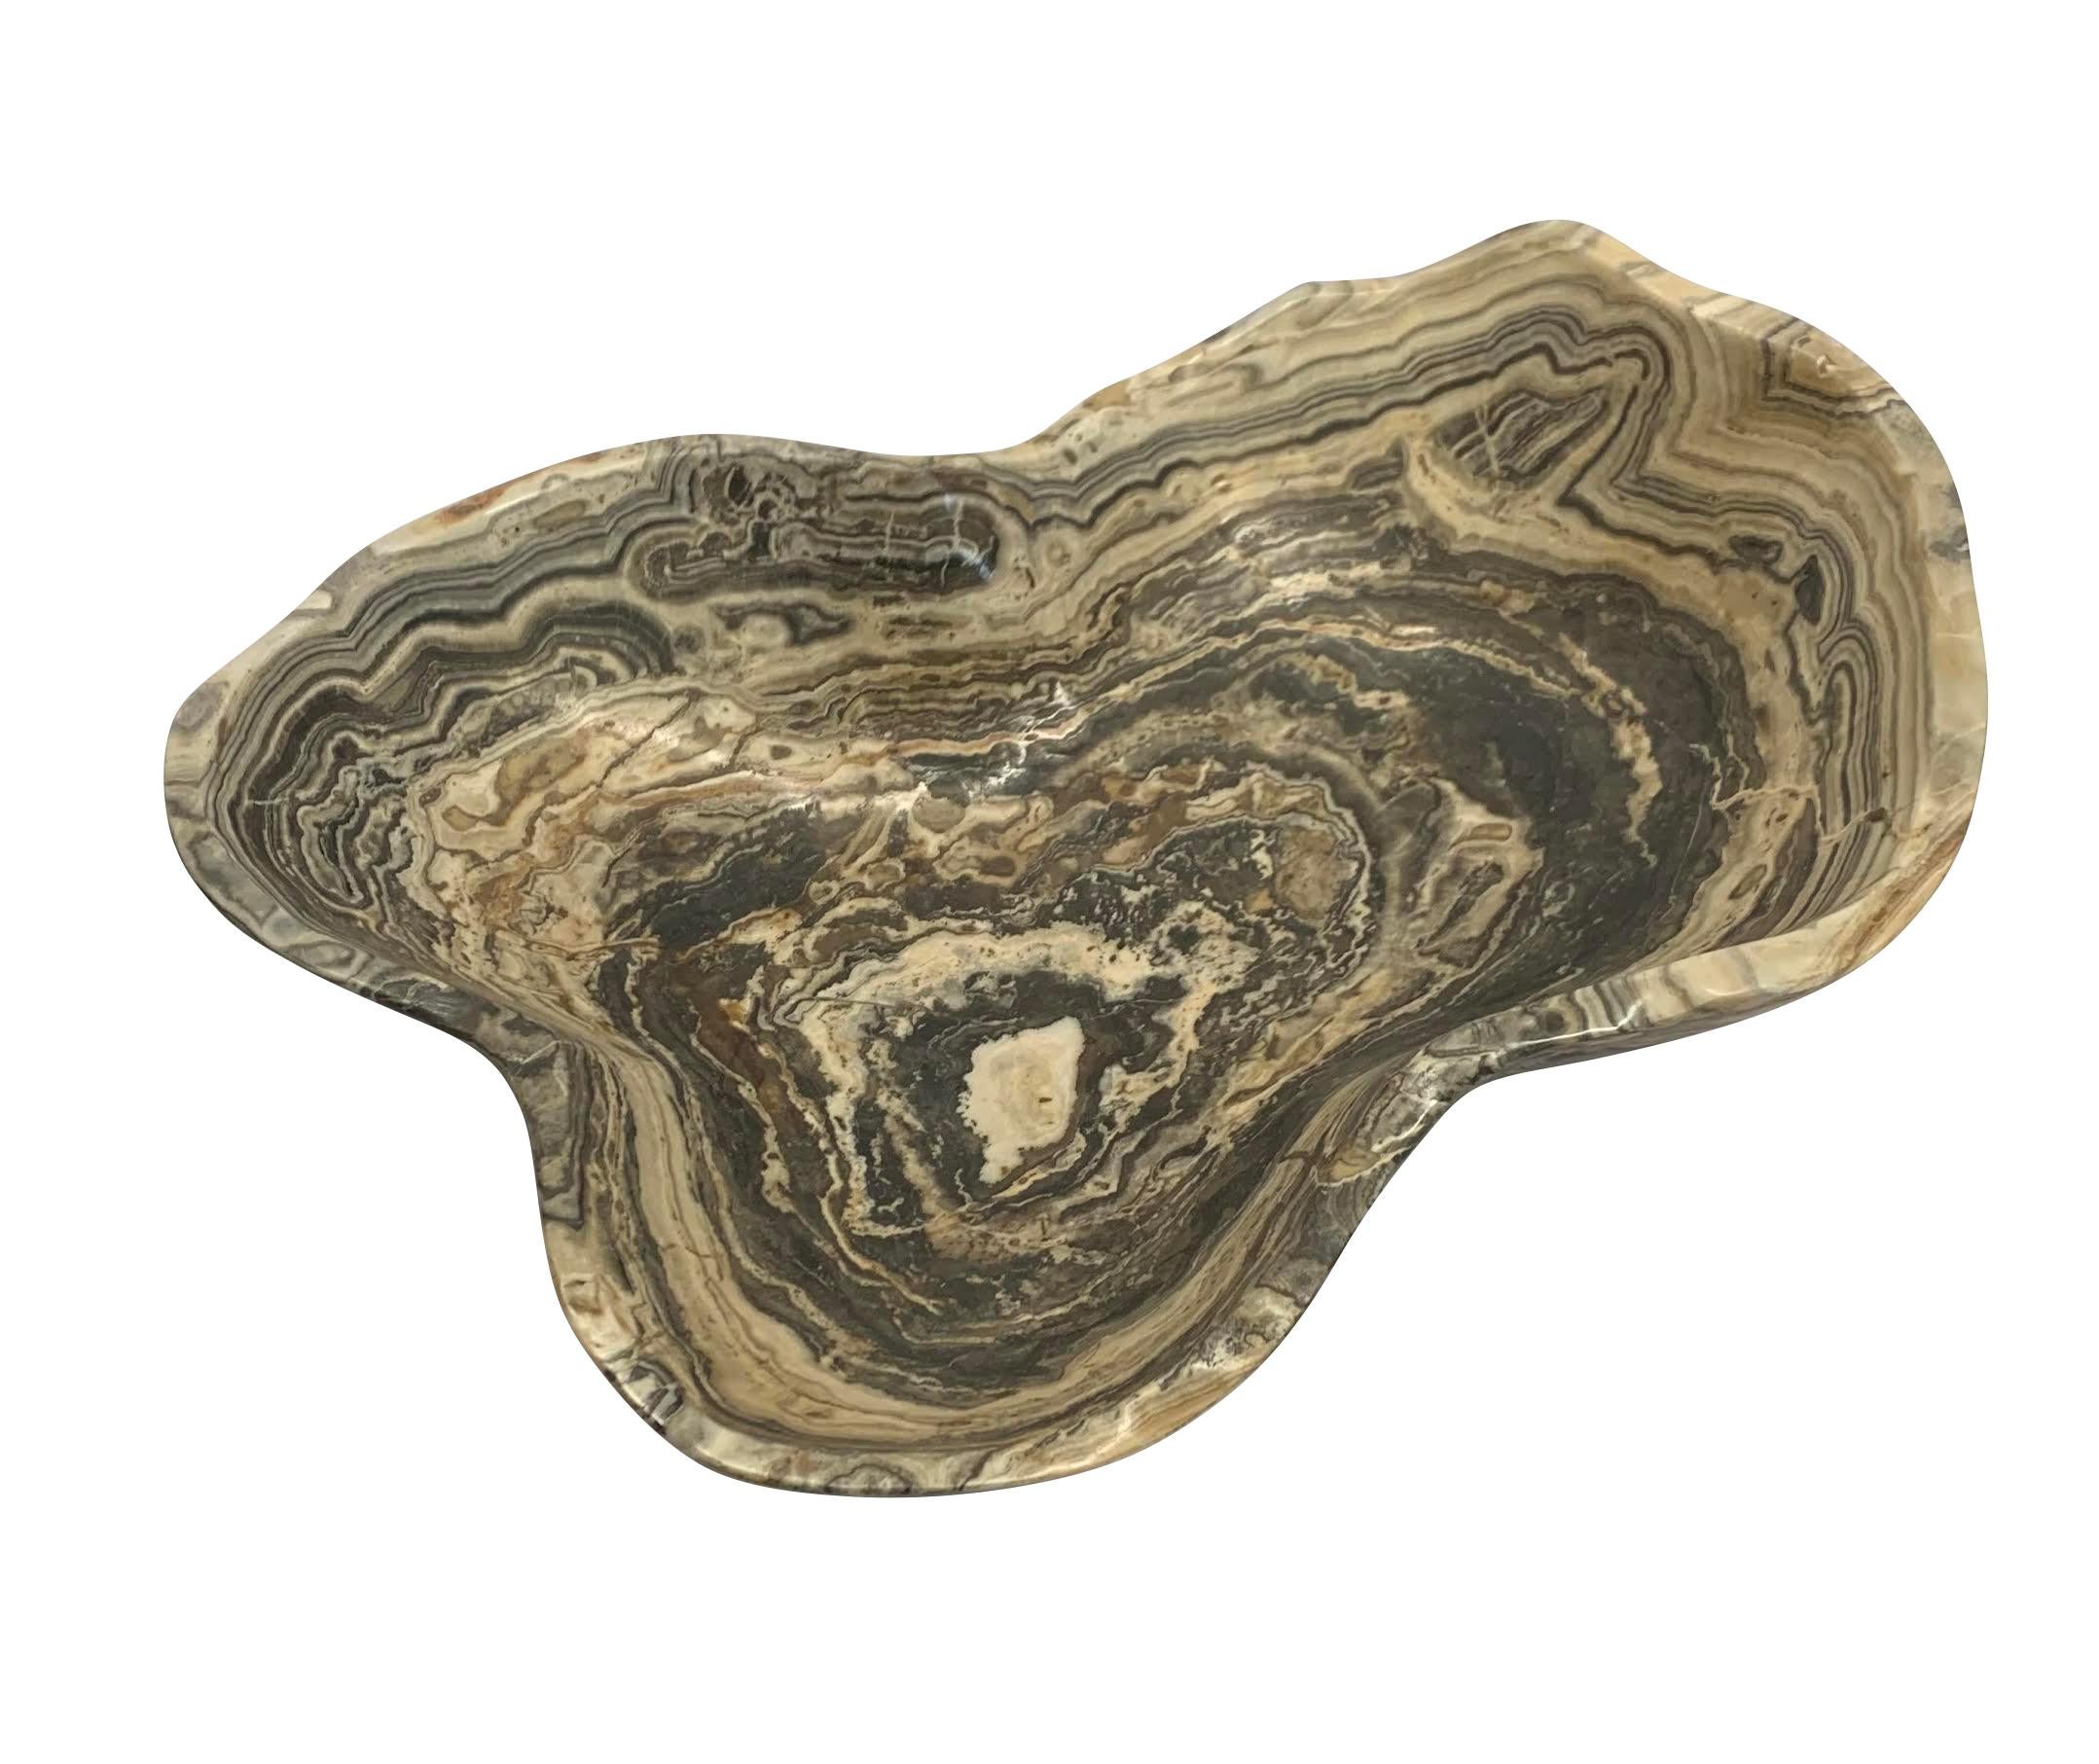 Moroccan Grey And Off White Free Form Shaped Onyx Bowl, Morocco, Contemporary